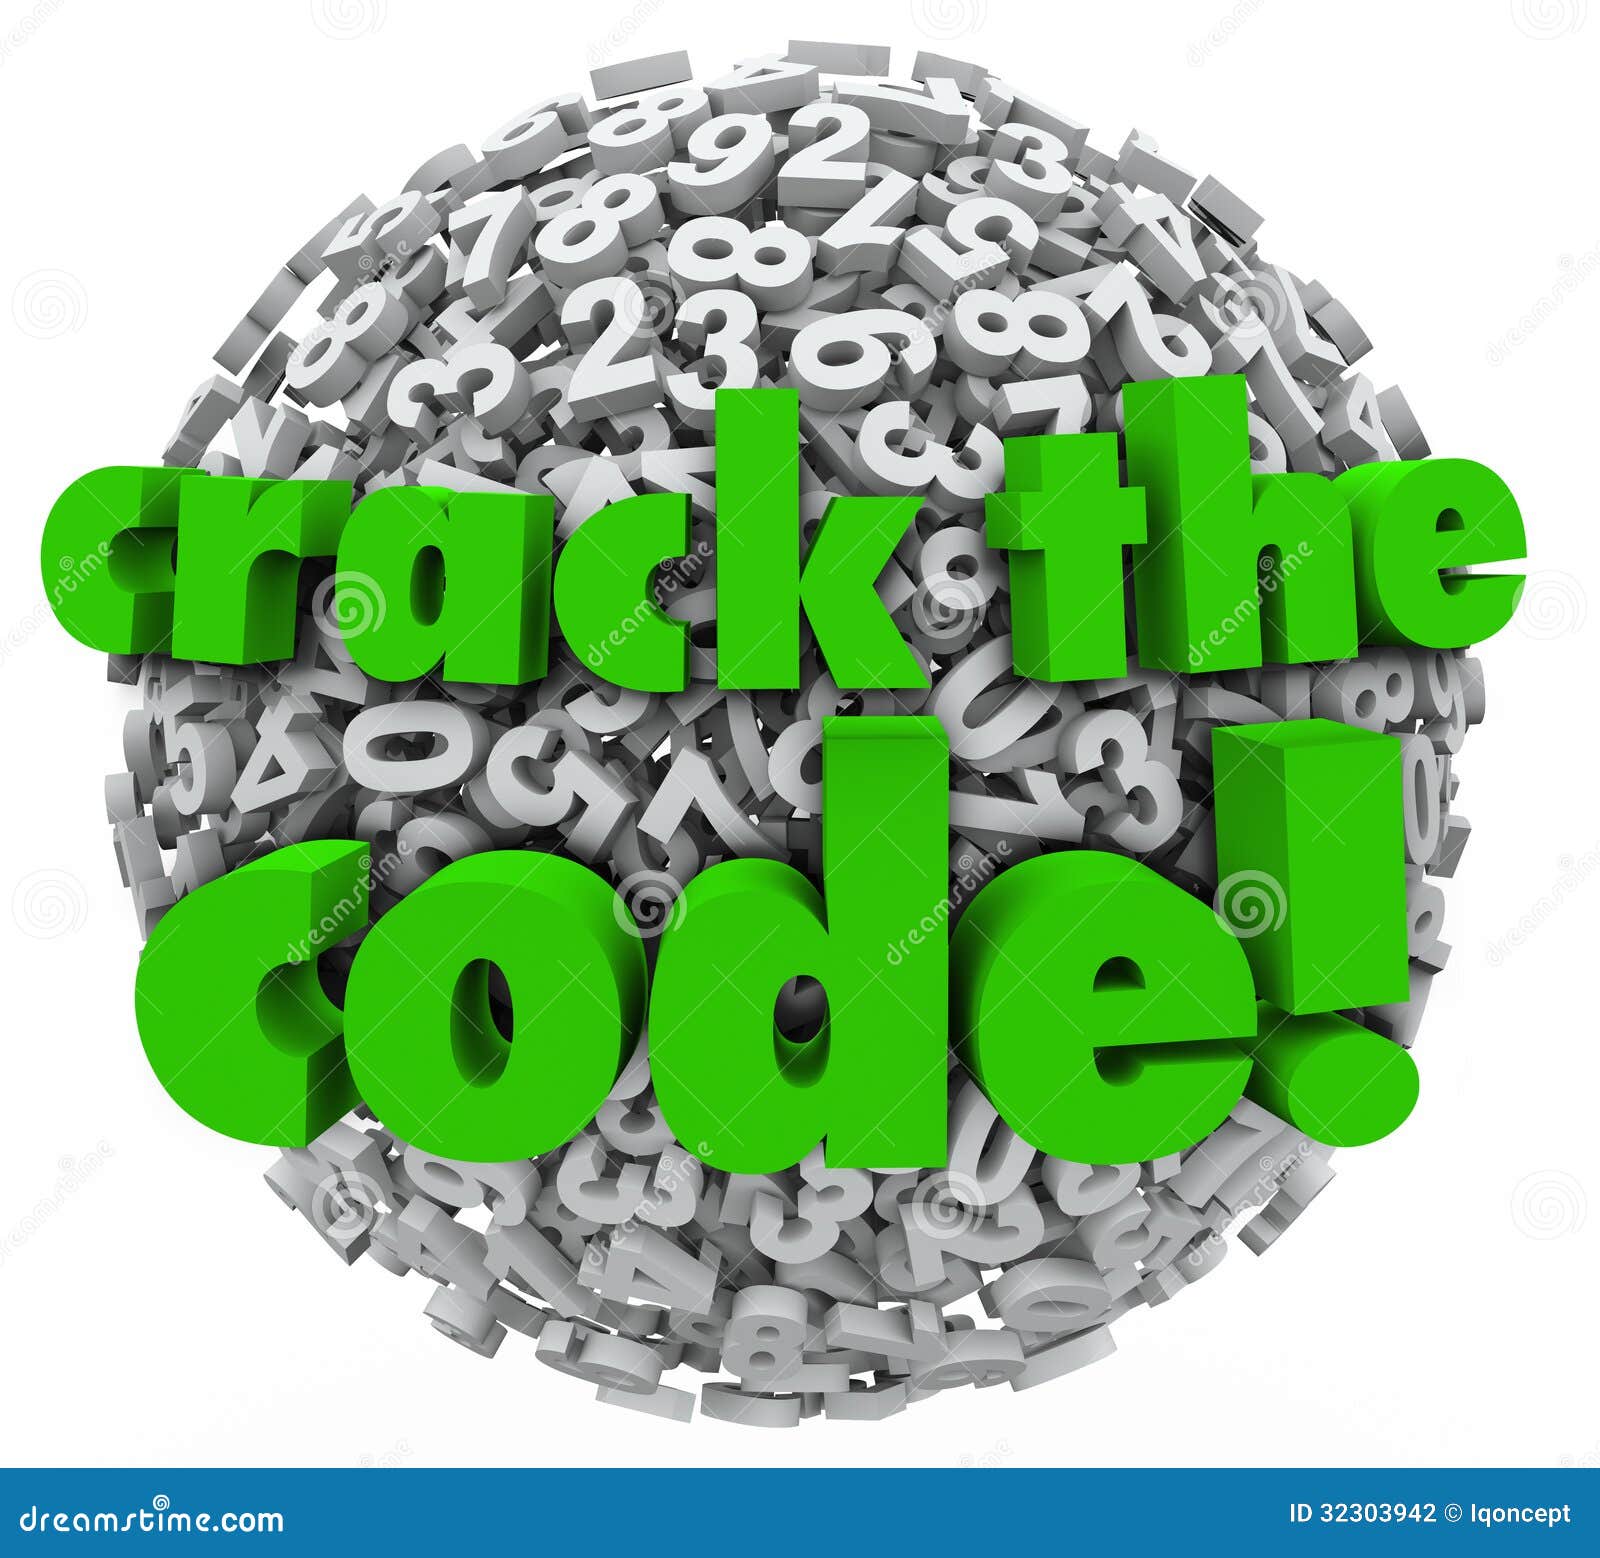 https://thumbs.dreamstime.com/z/crack-code-number-sphere-breaking-password-security-words-ball-numbers-to-illustrate-network-computer-to-32303942.jpg